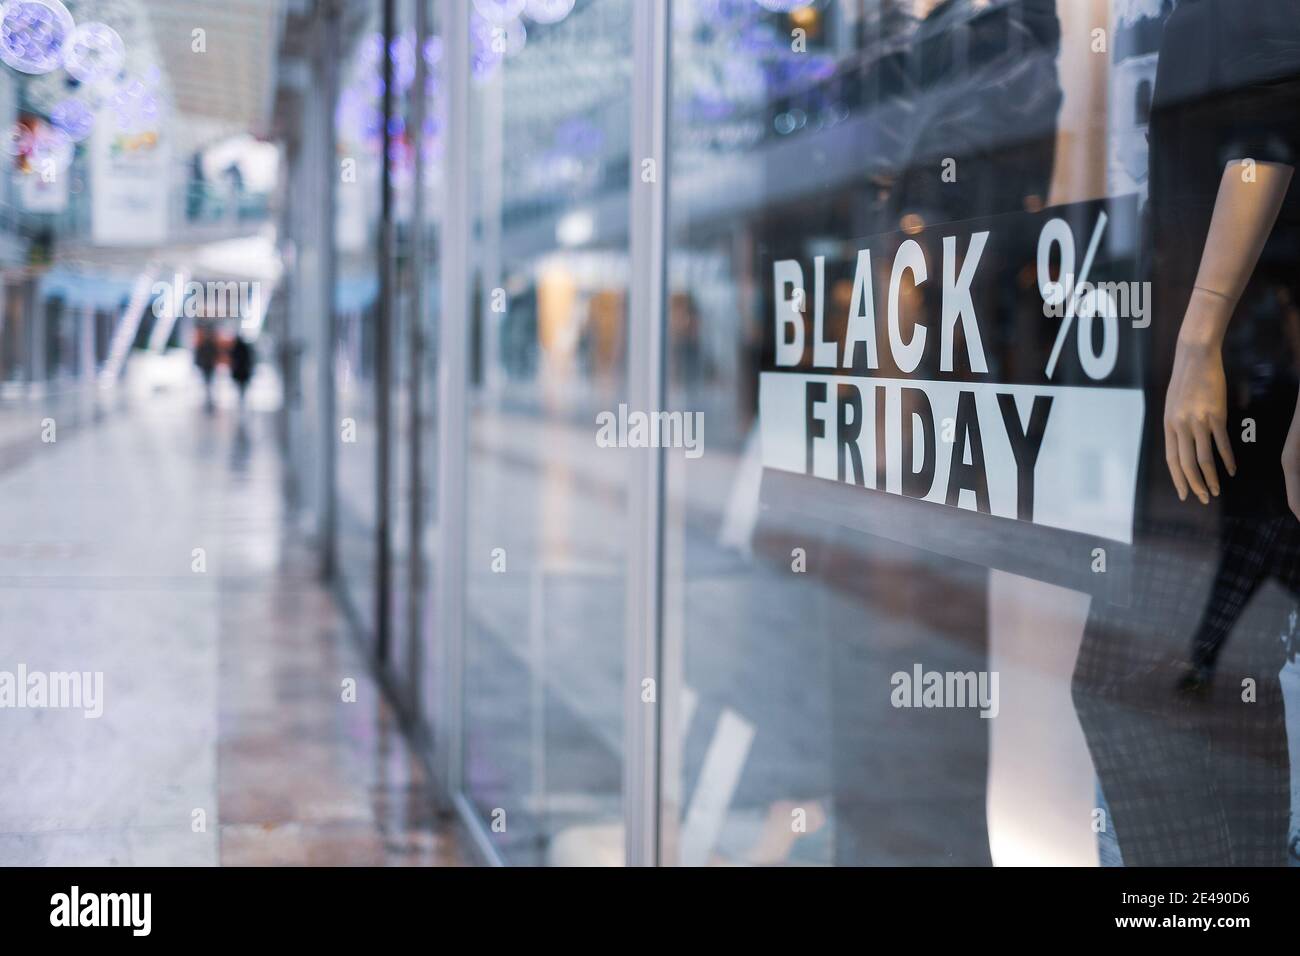 black friday sign on store display background in a mall during christmas holidays Stock Photo